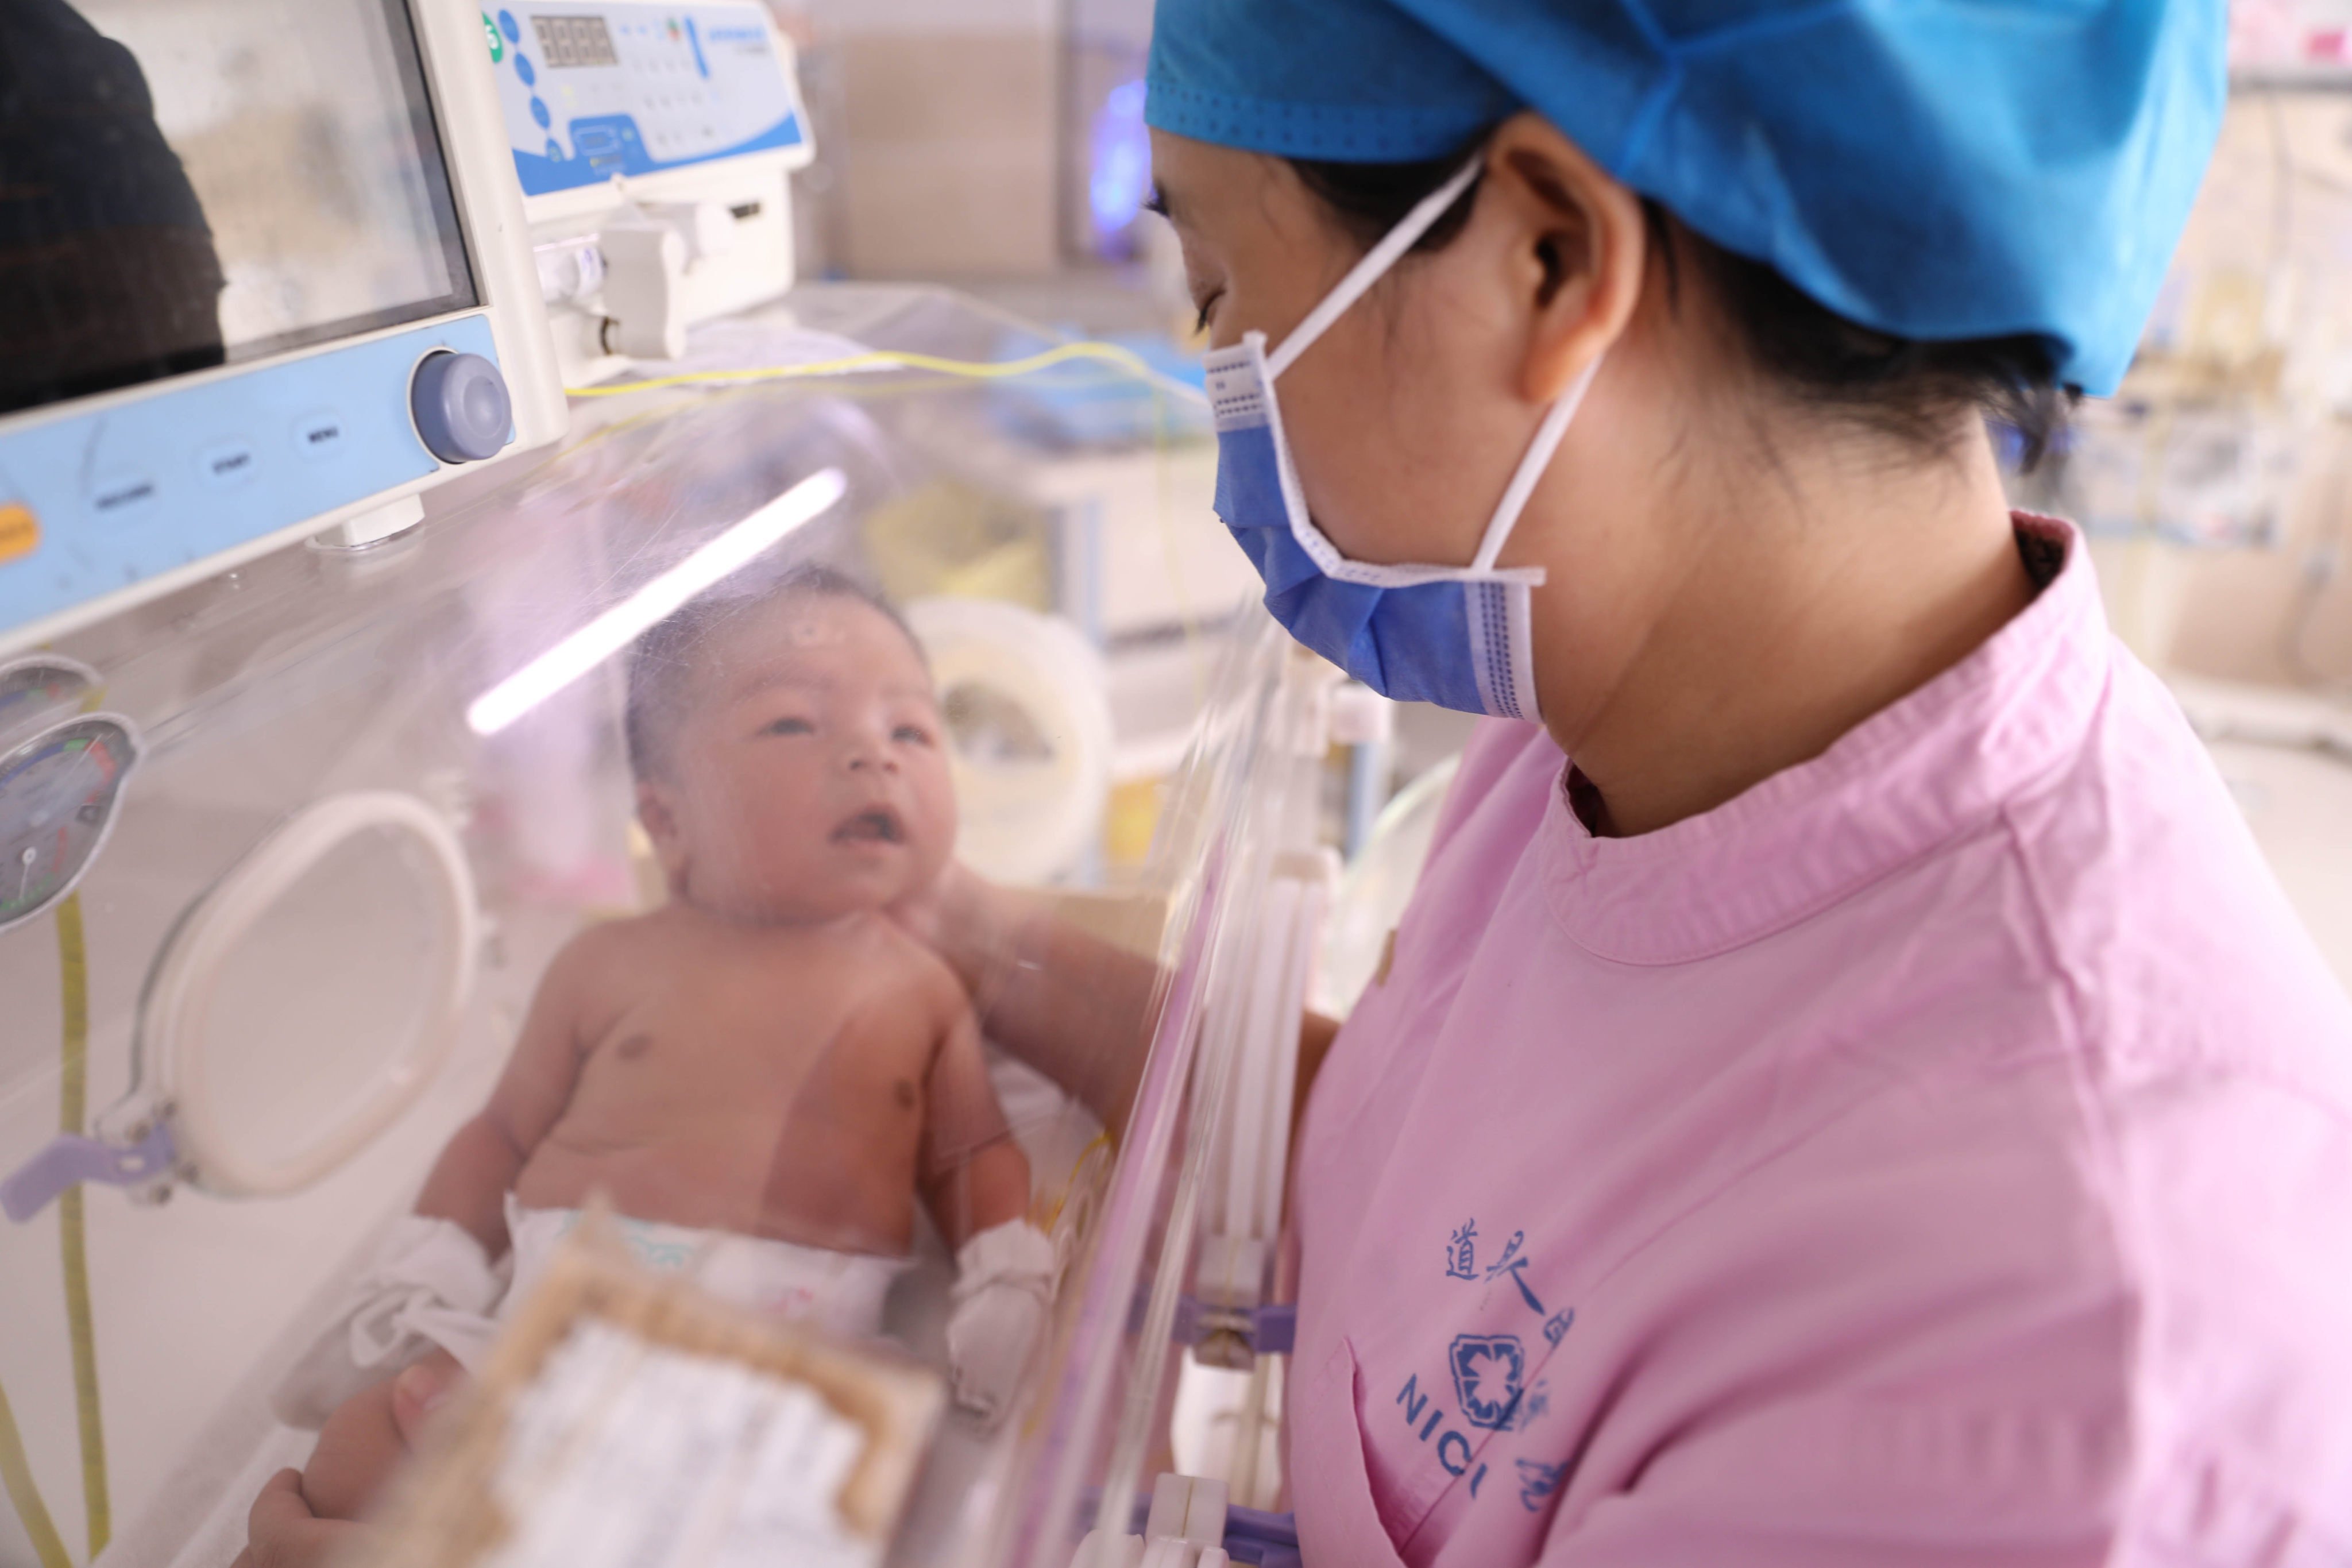 Annual data on Monday should show whether China’s total births and birth rate hit record lows in 2021. Photo: Getty Images